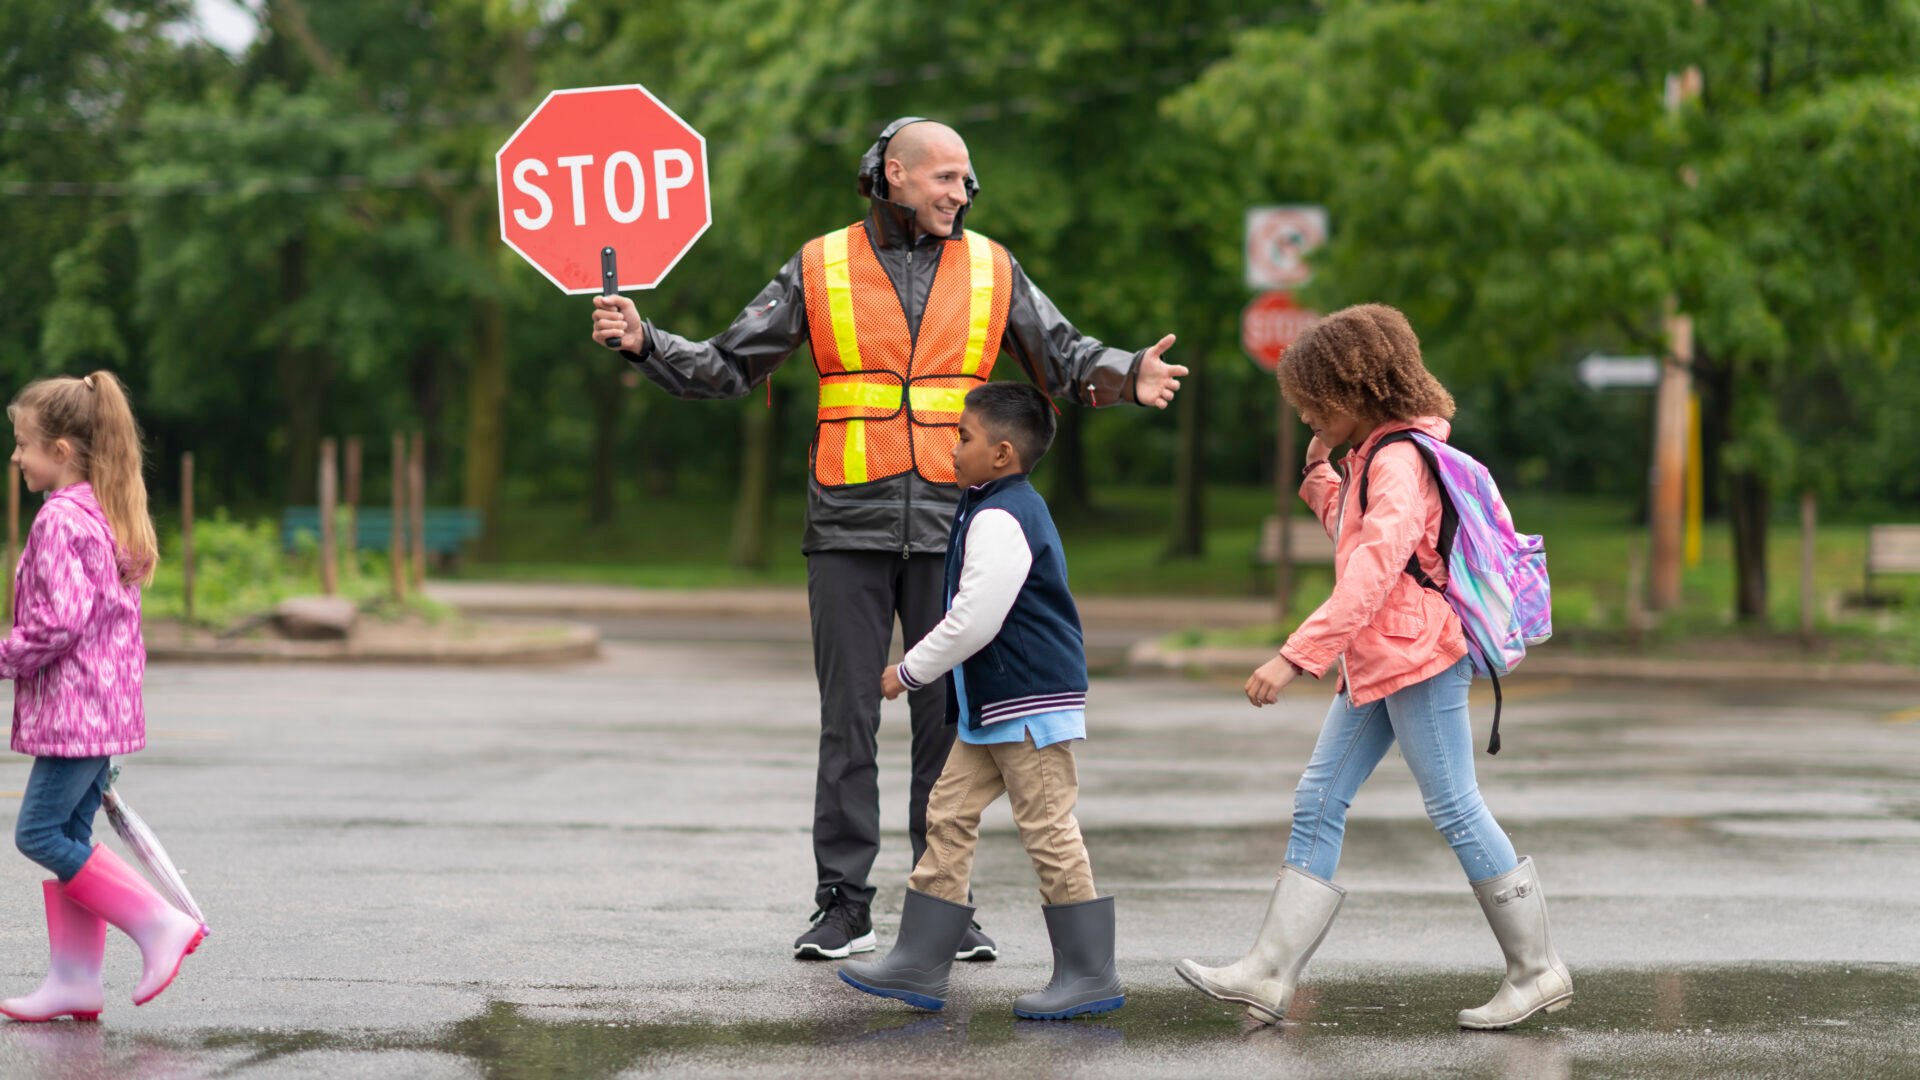 A multi-ethnic group of elementary students are on their way to school. The children are crossing the street with the assistance of a smiling crossing guard. The male crossing guard is happy to help the kids stay safe. It's a rainy day and the children are wearing rain coats and rain boots. The crossing guard is holding a stop sign and his wearing a reflective safety vest.